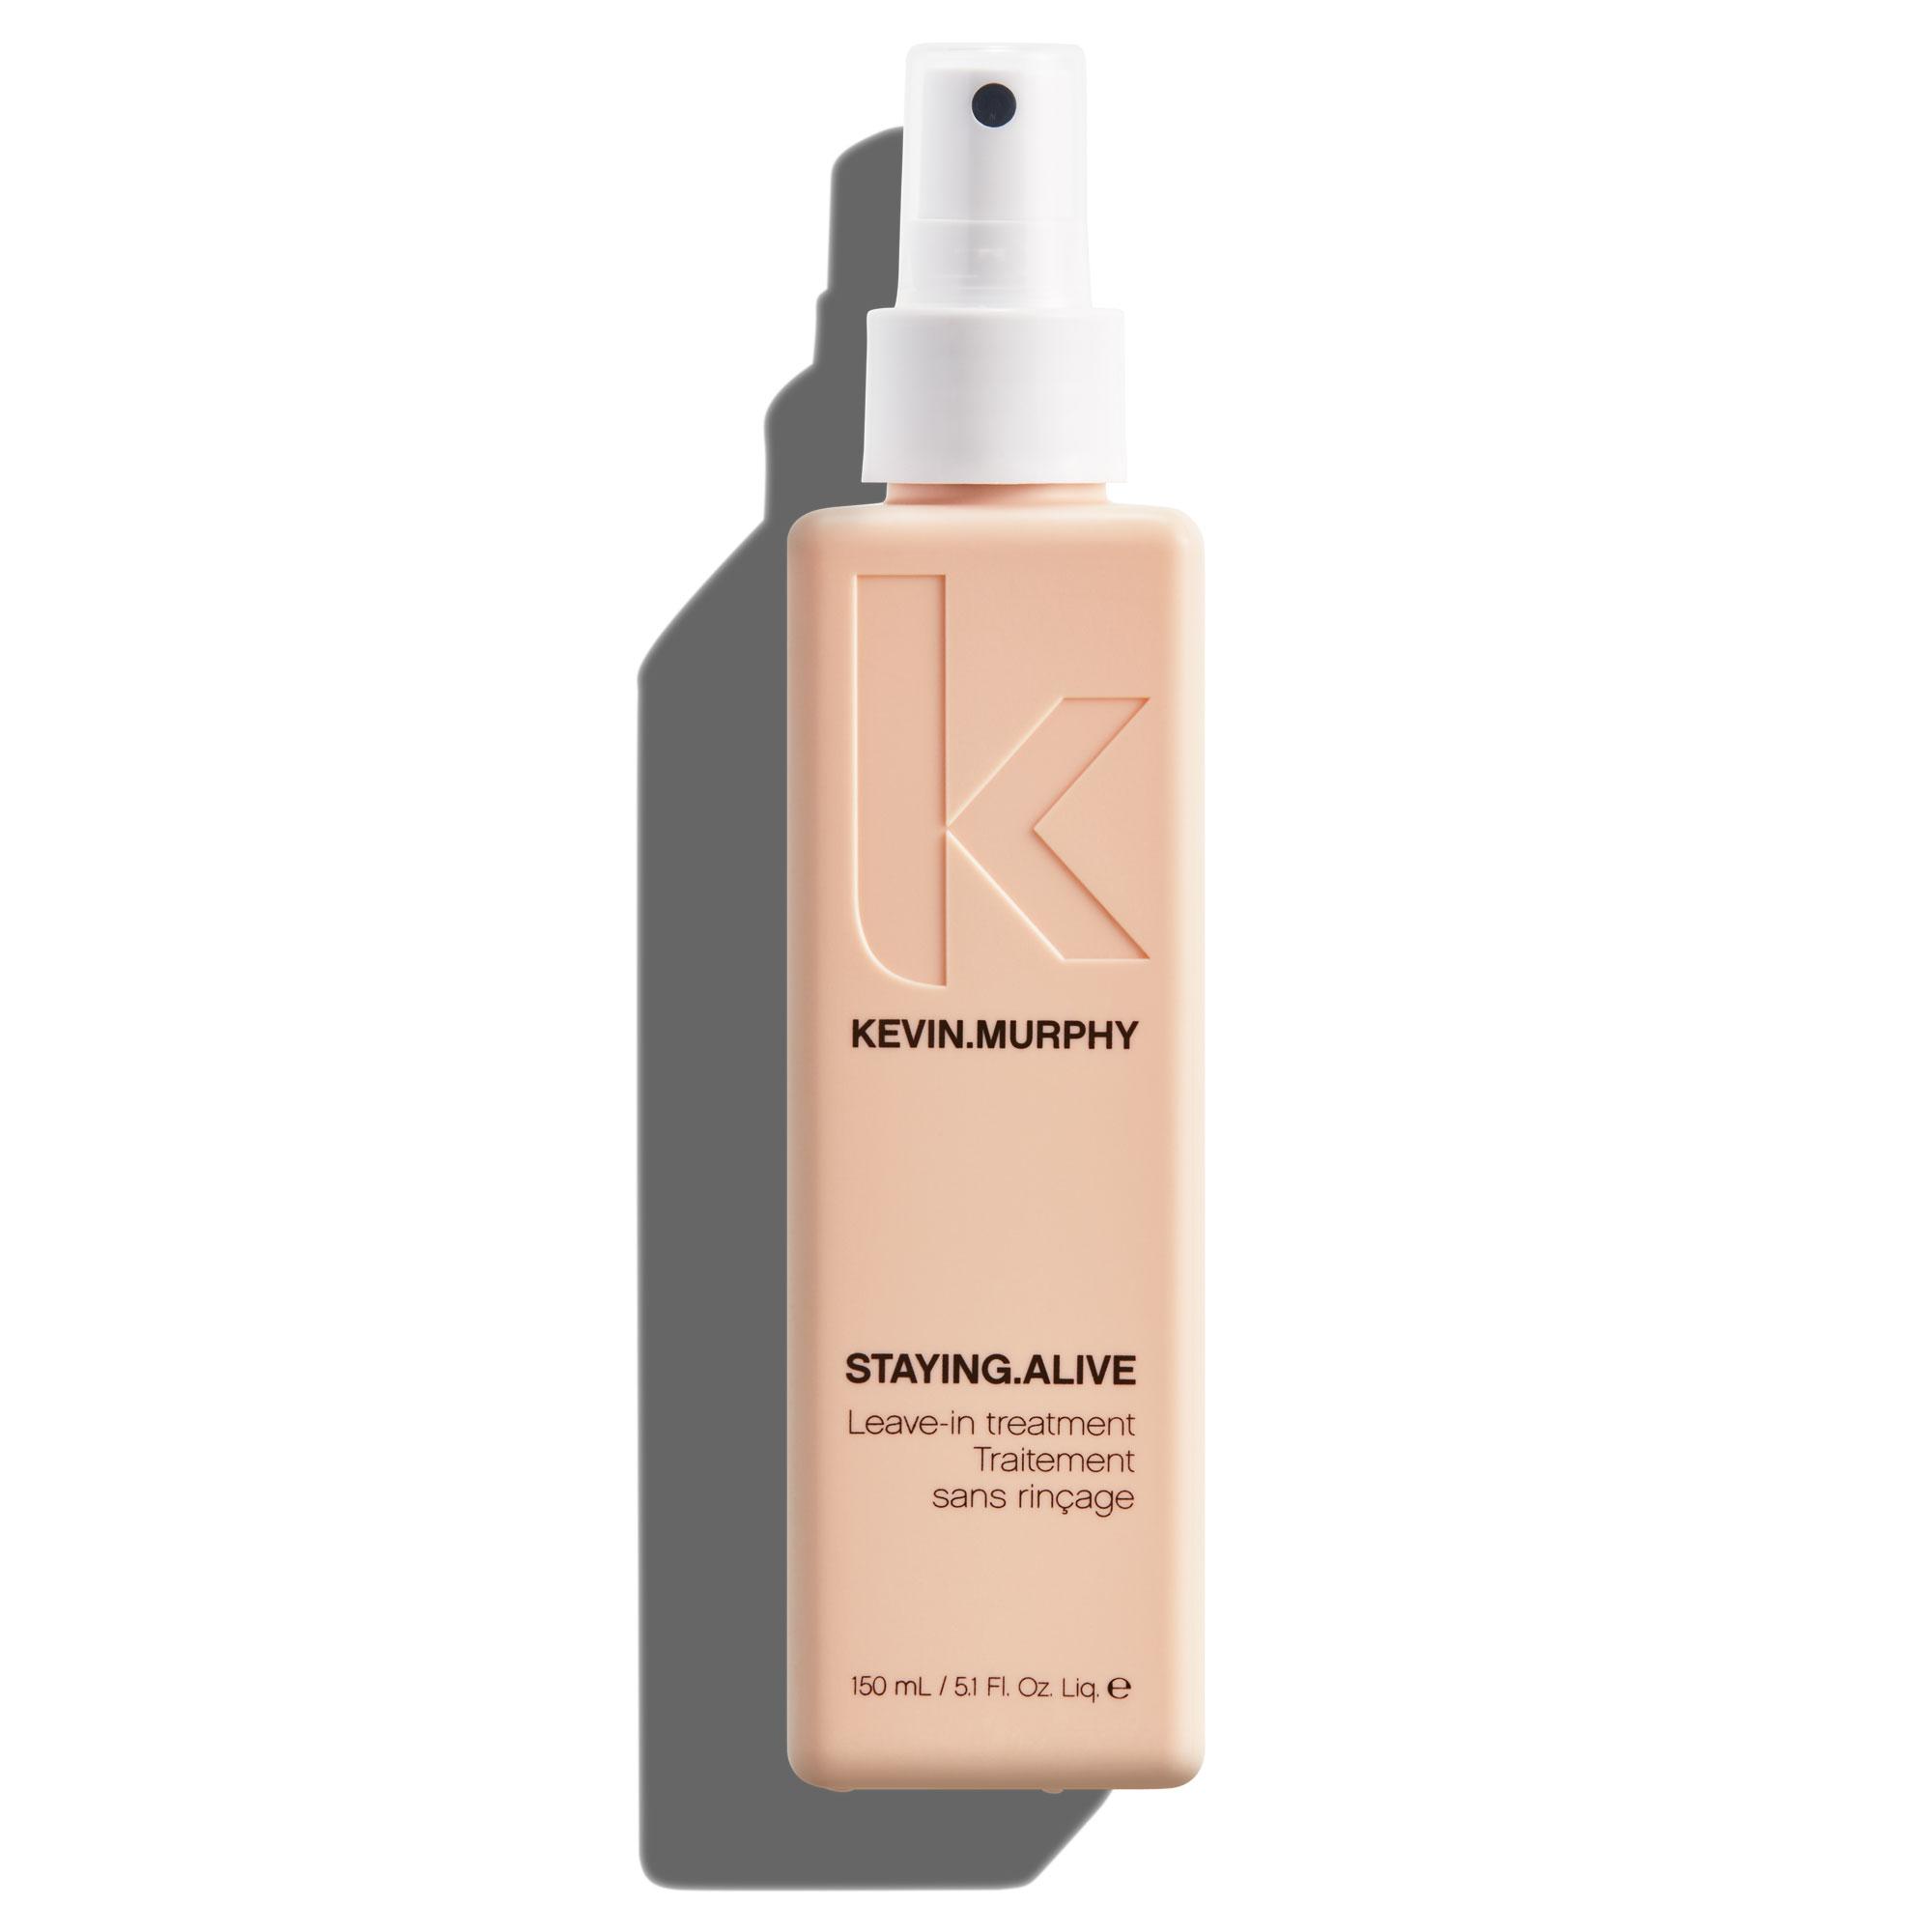 KEVIN.MURPHY STAYING.ALIVE 5.1oz